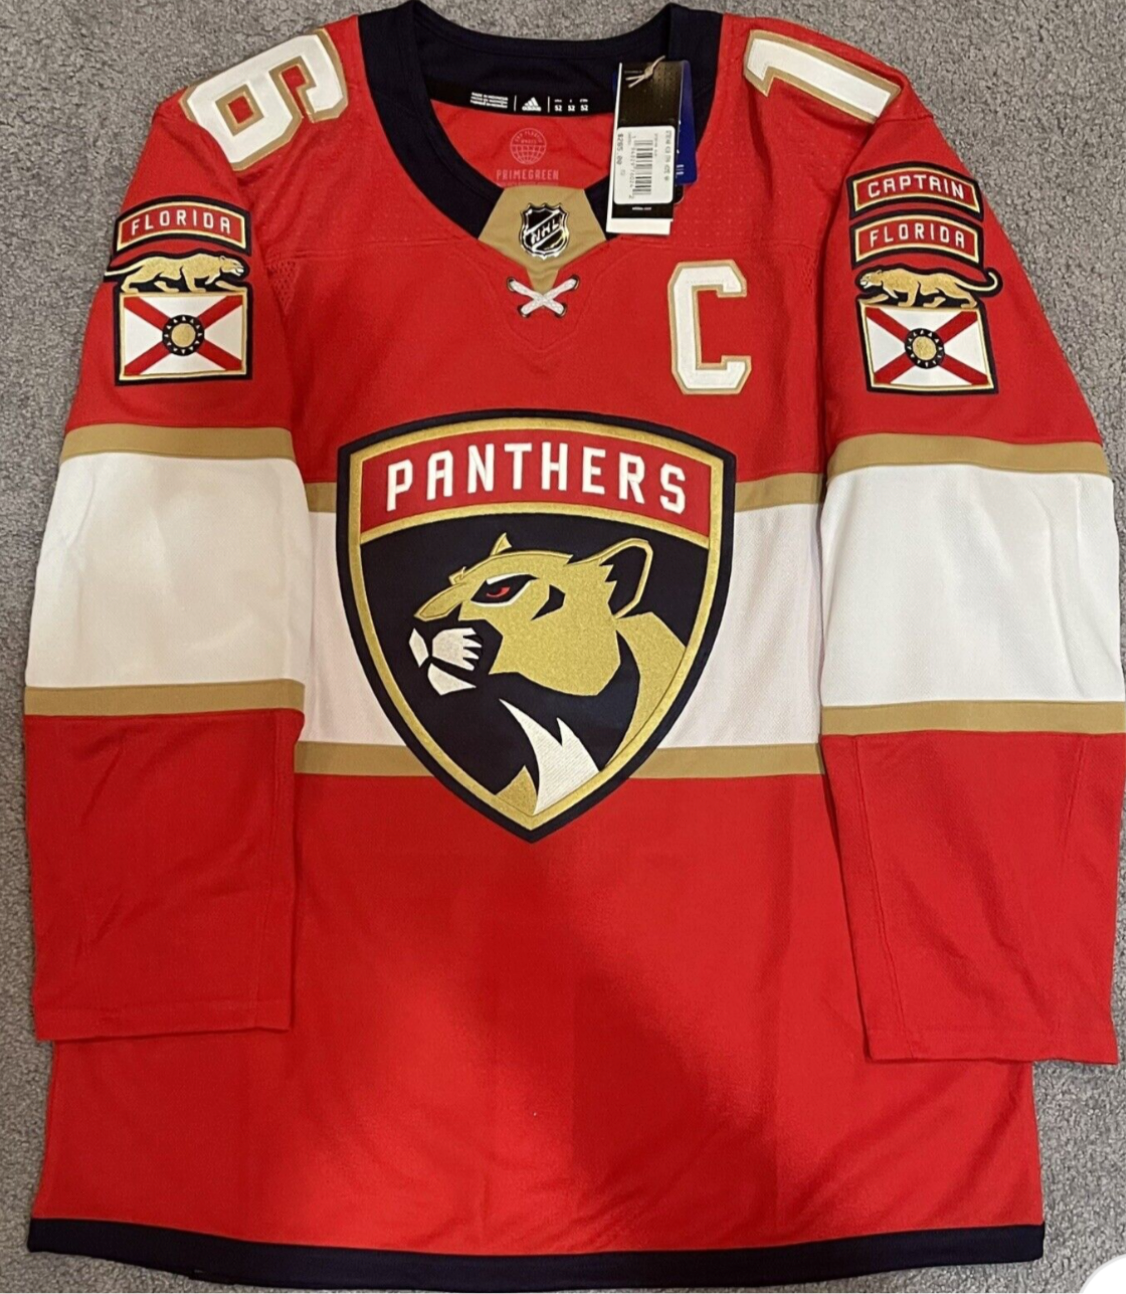 Aleksander Barkov Florida Panthers NHL Authentic Adidas Home Premier Player Jersey - Red